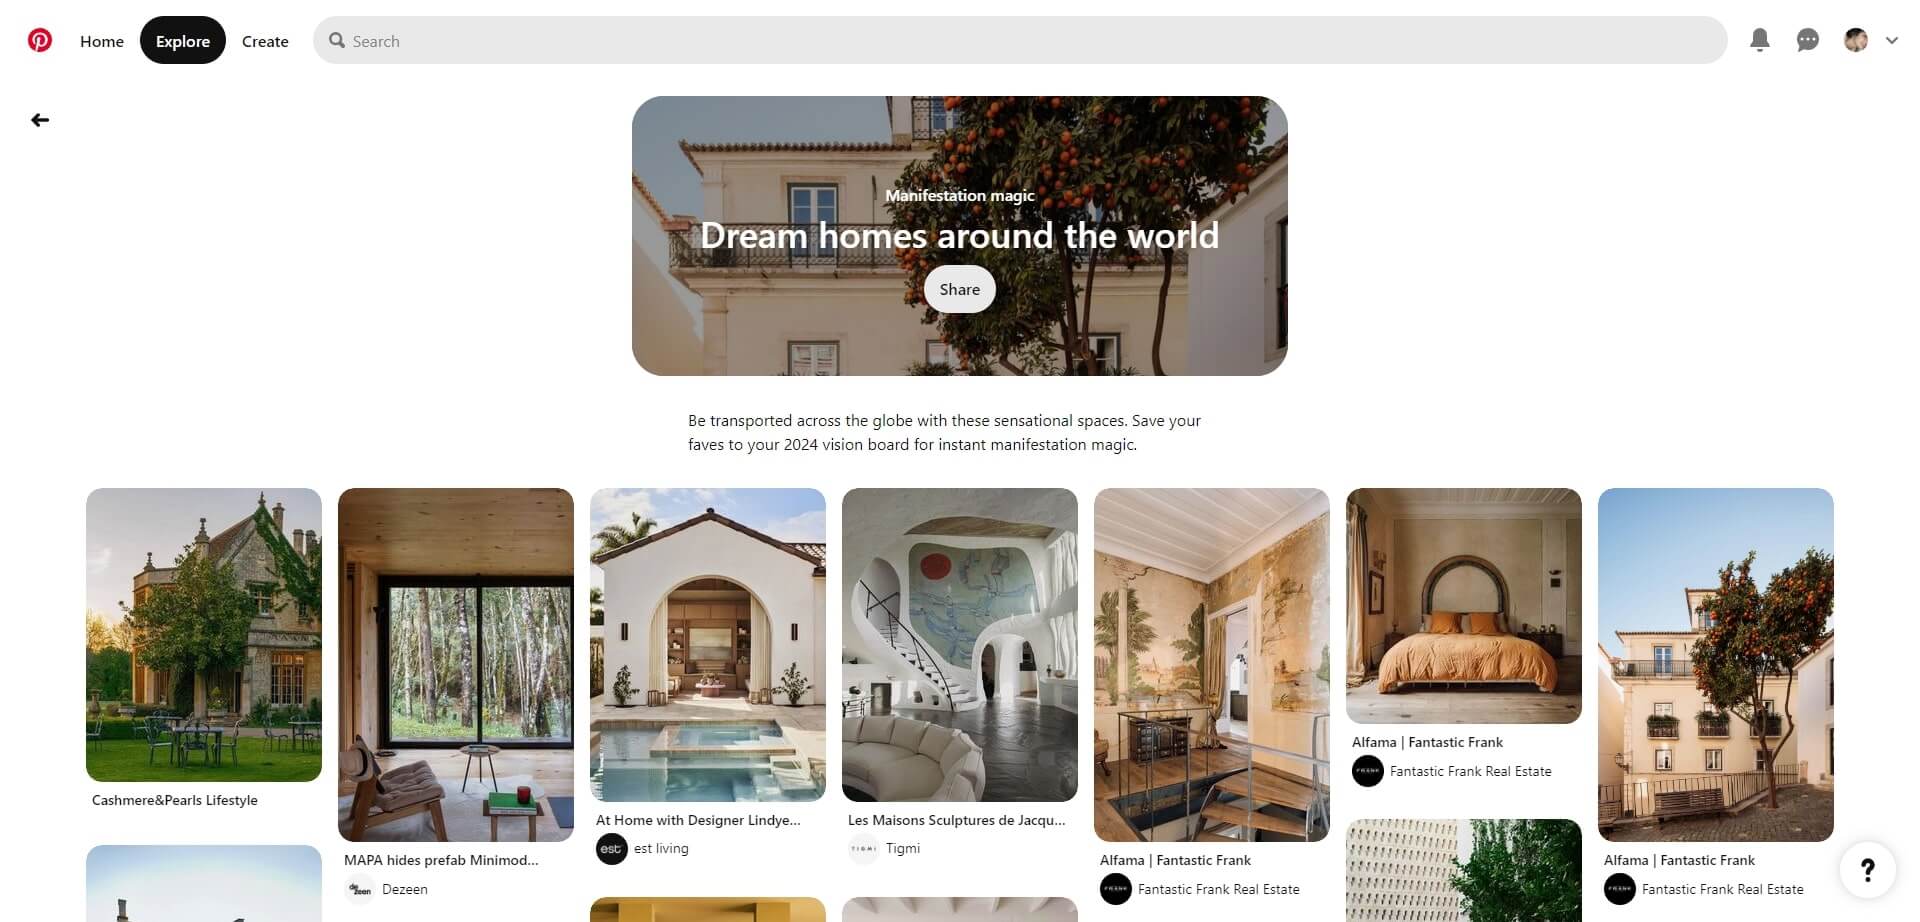 A screenshot of a Pinterest board featuring small pictures of dream homes around the world.